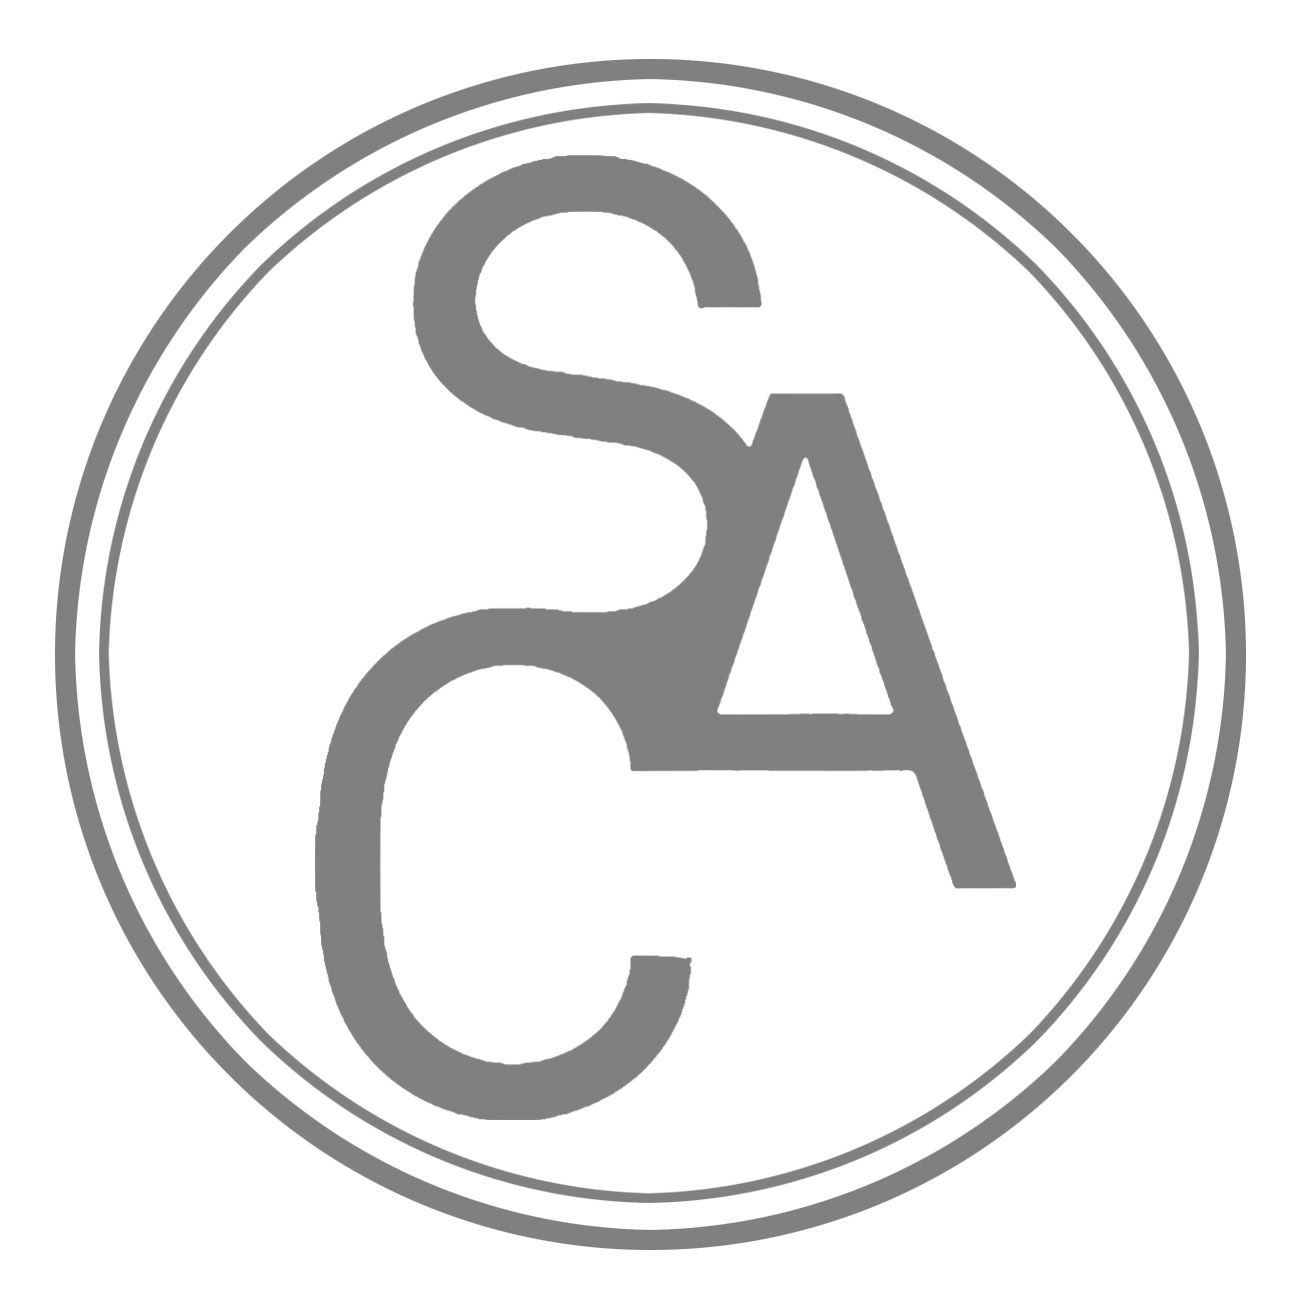 SAC (Architect & Engineers)|Legal Services|Professional Services